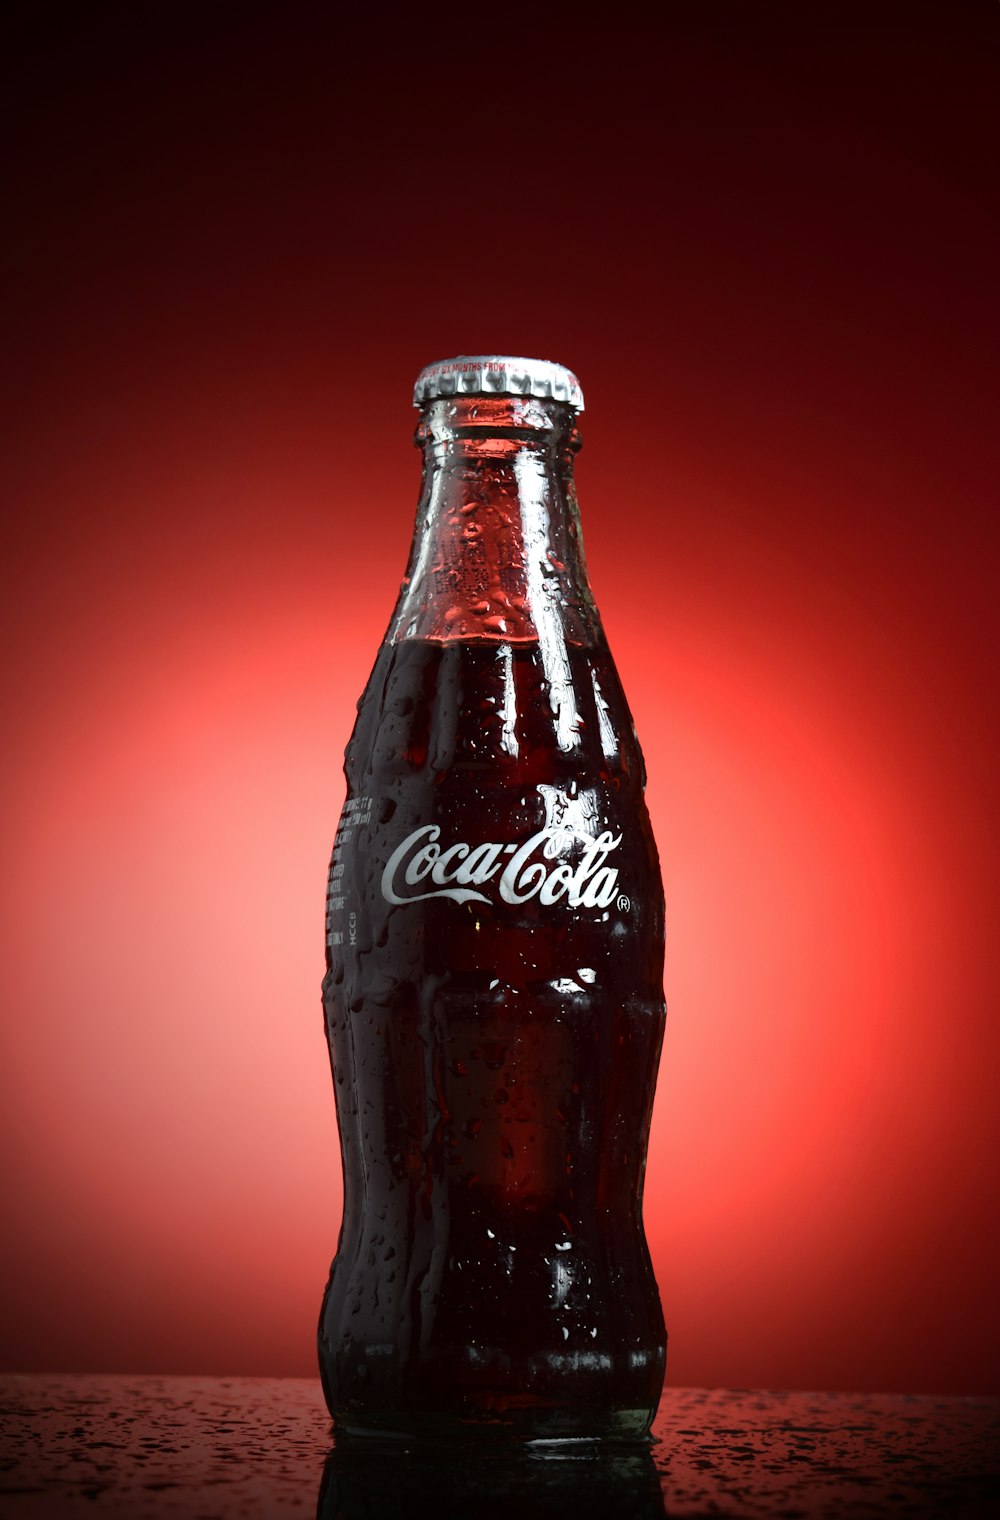 coca cola bottle with red background photo – Free Coca cola Image on  Unsplash